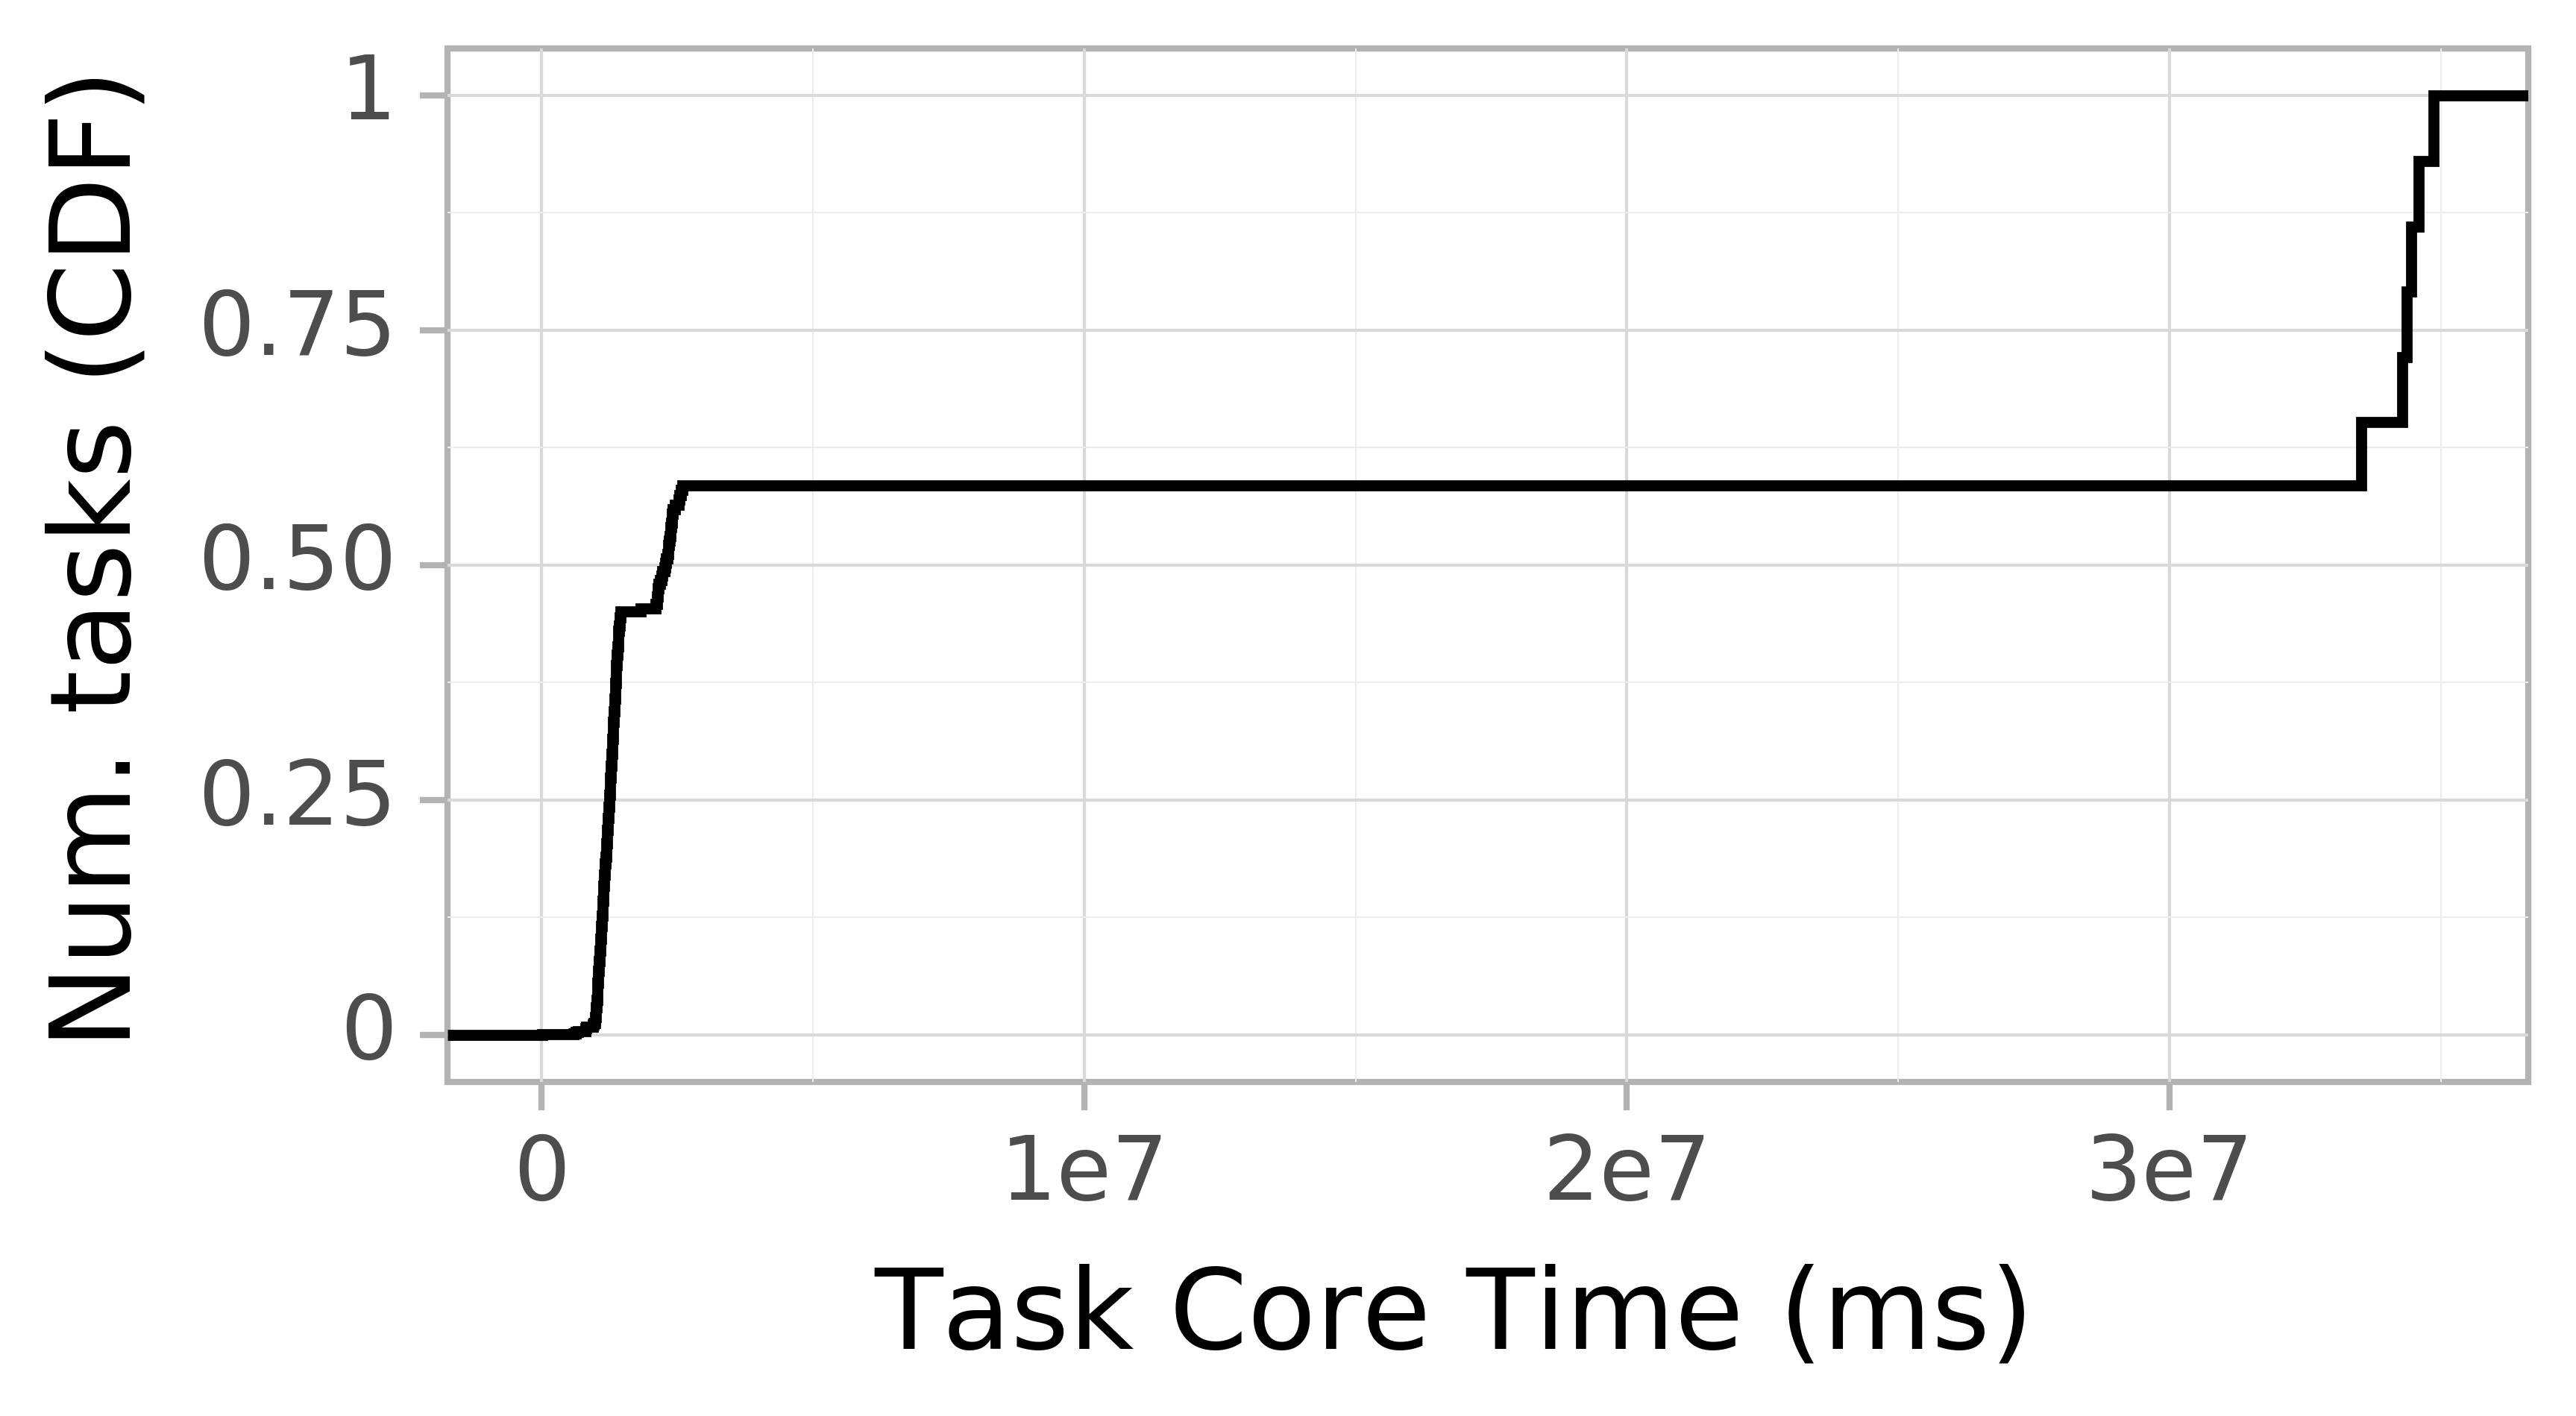 task resource time CDF graph for the Pegasus_P3 trace.